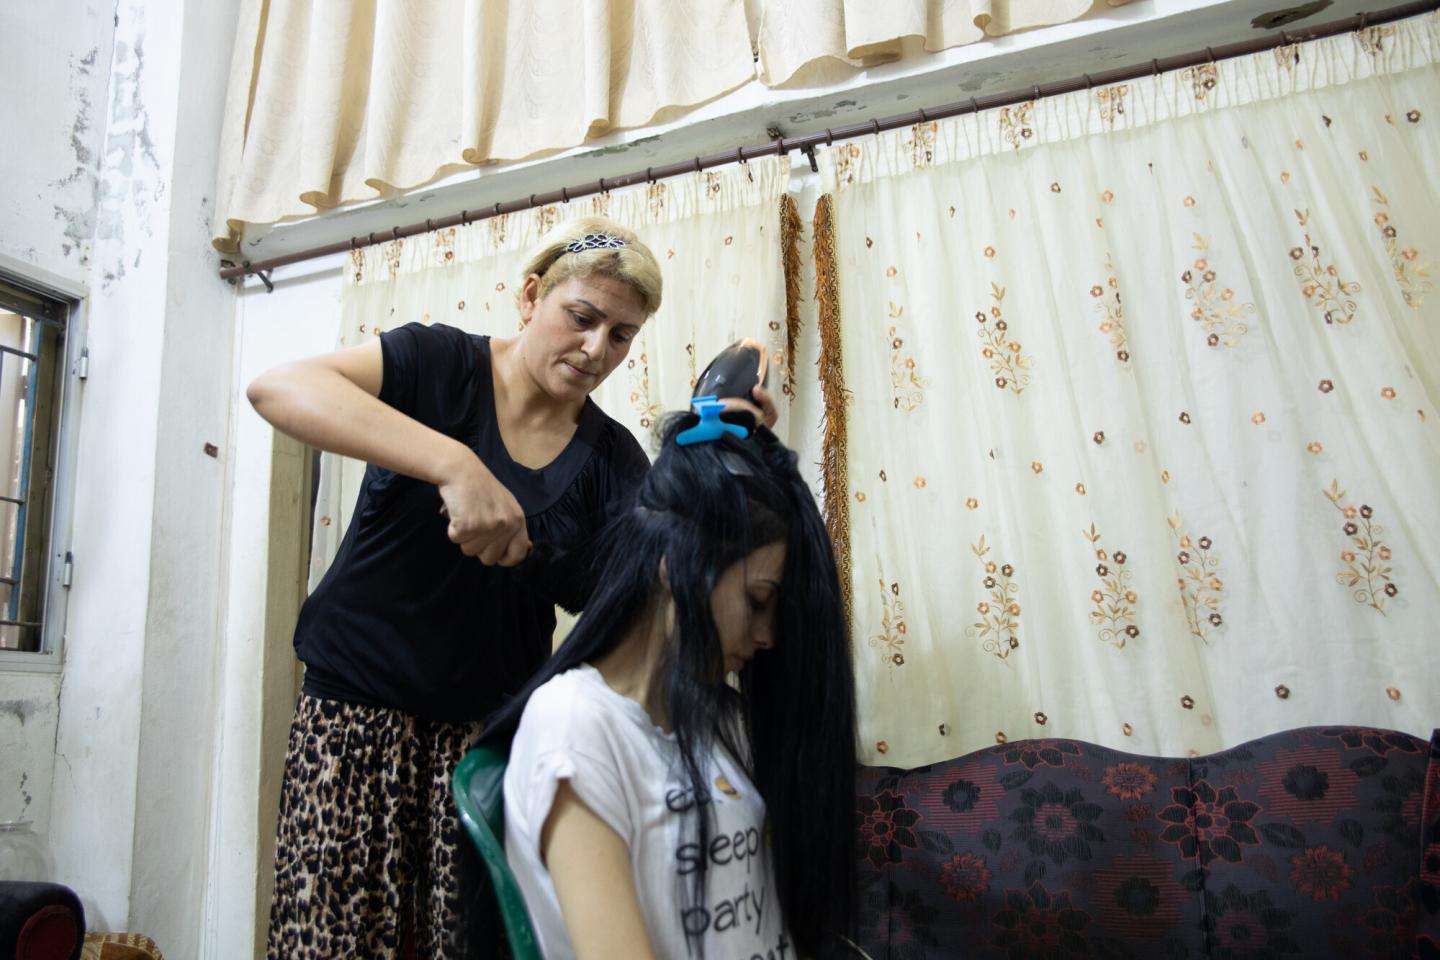 A woman brushes another woman's hair